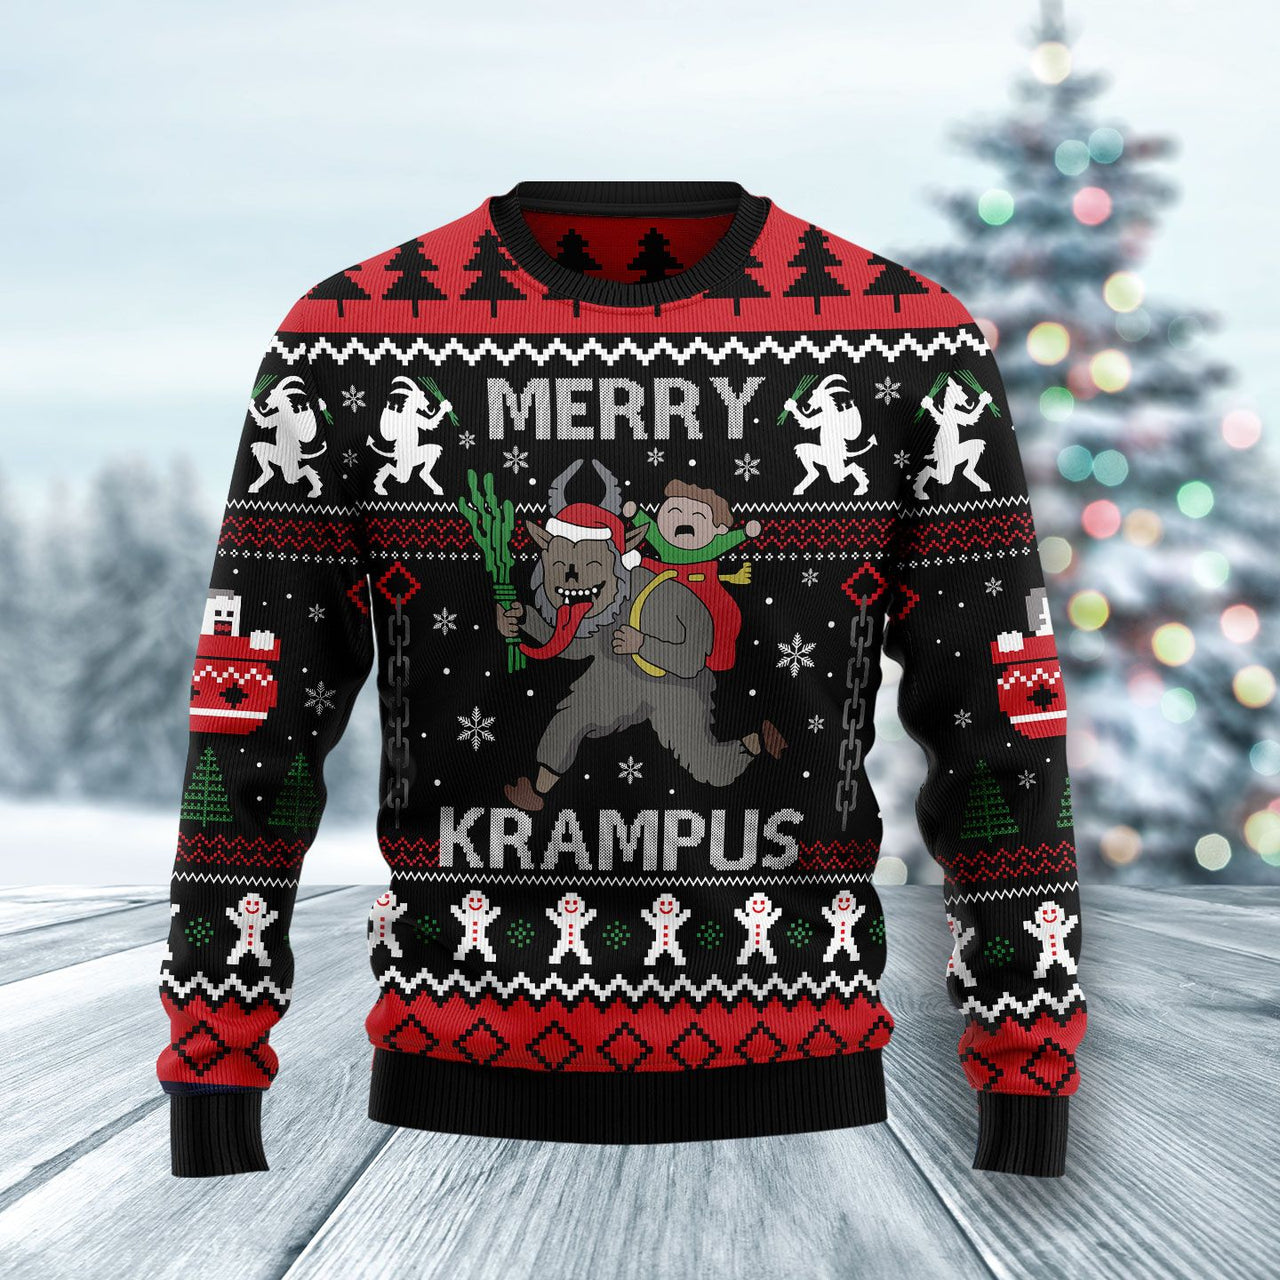 merry-krampus-ugly-christmas-sweater